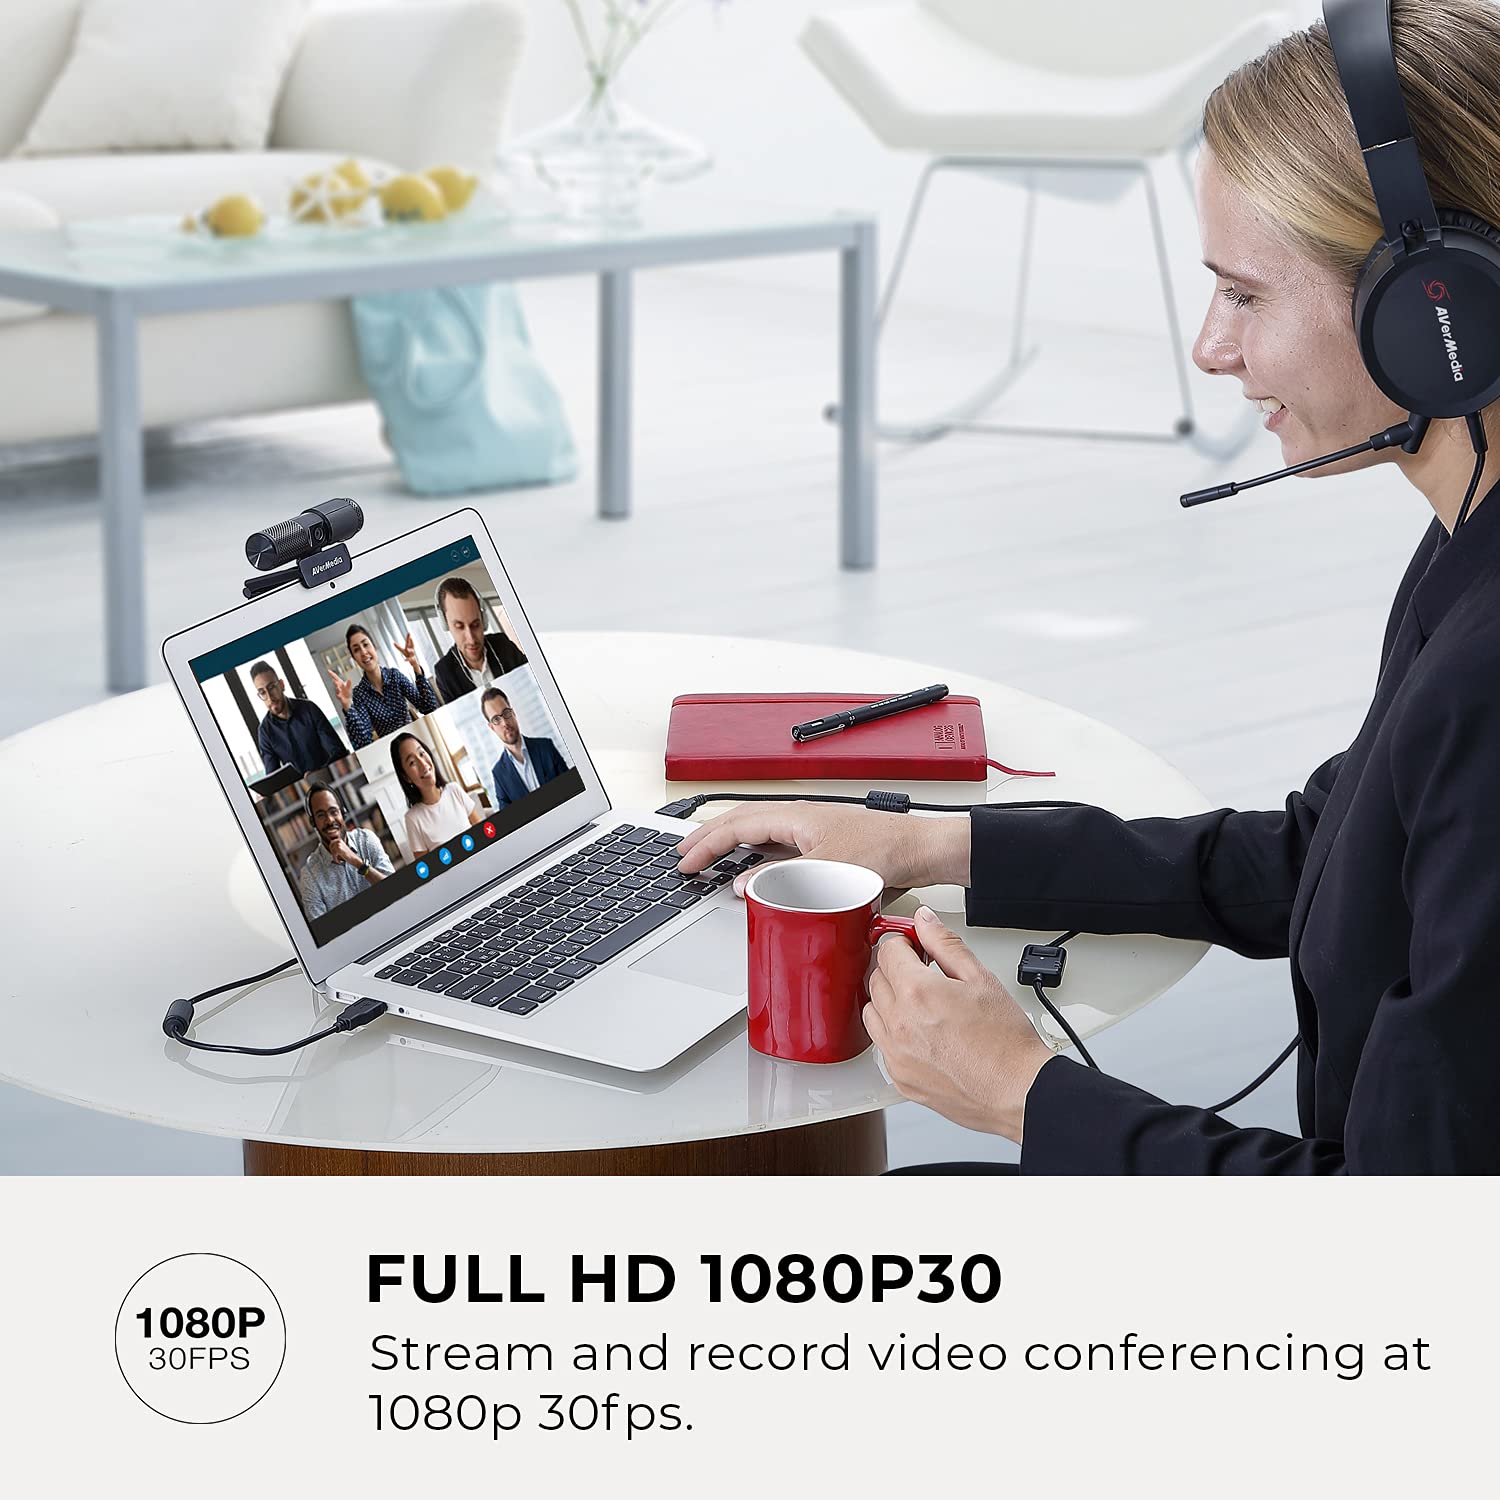 AVerMedia Live Streamer CAM 313: Full HD 1080P Streaming Webcam, Privacy Shutter, Dual Microphone, 360 Degree Swivel Design, Exclusive AI Facial Tracking Stickers. (PW313)